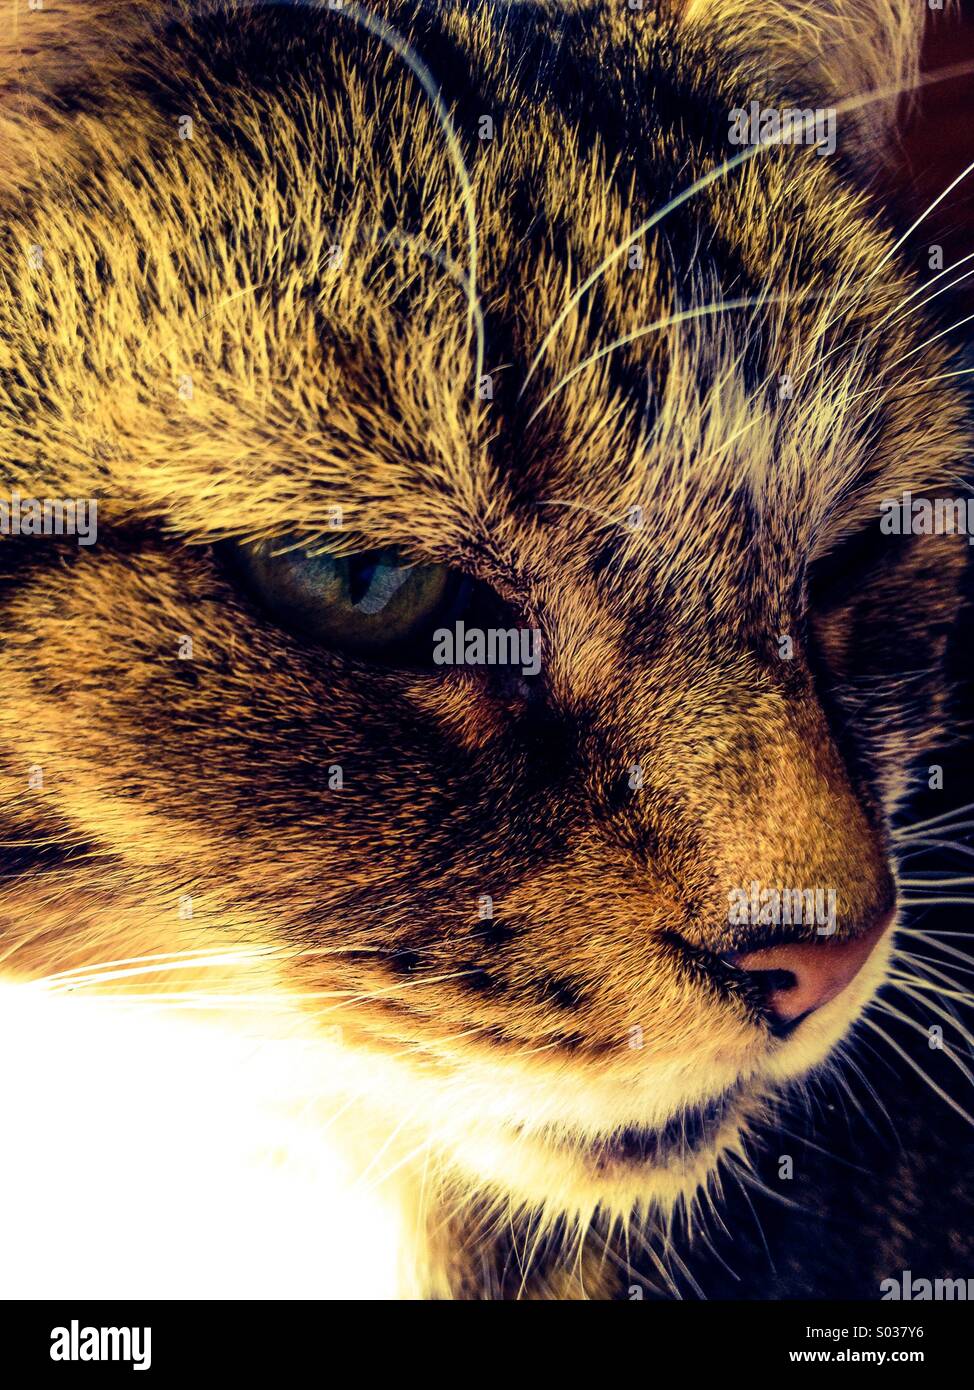 Close up of tabby cats face Stock Photo